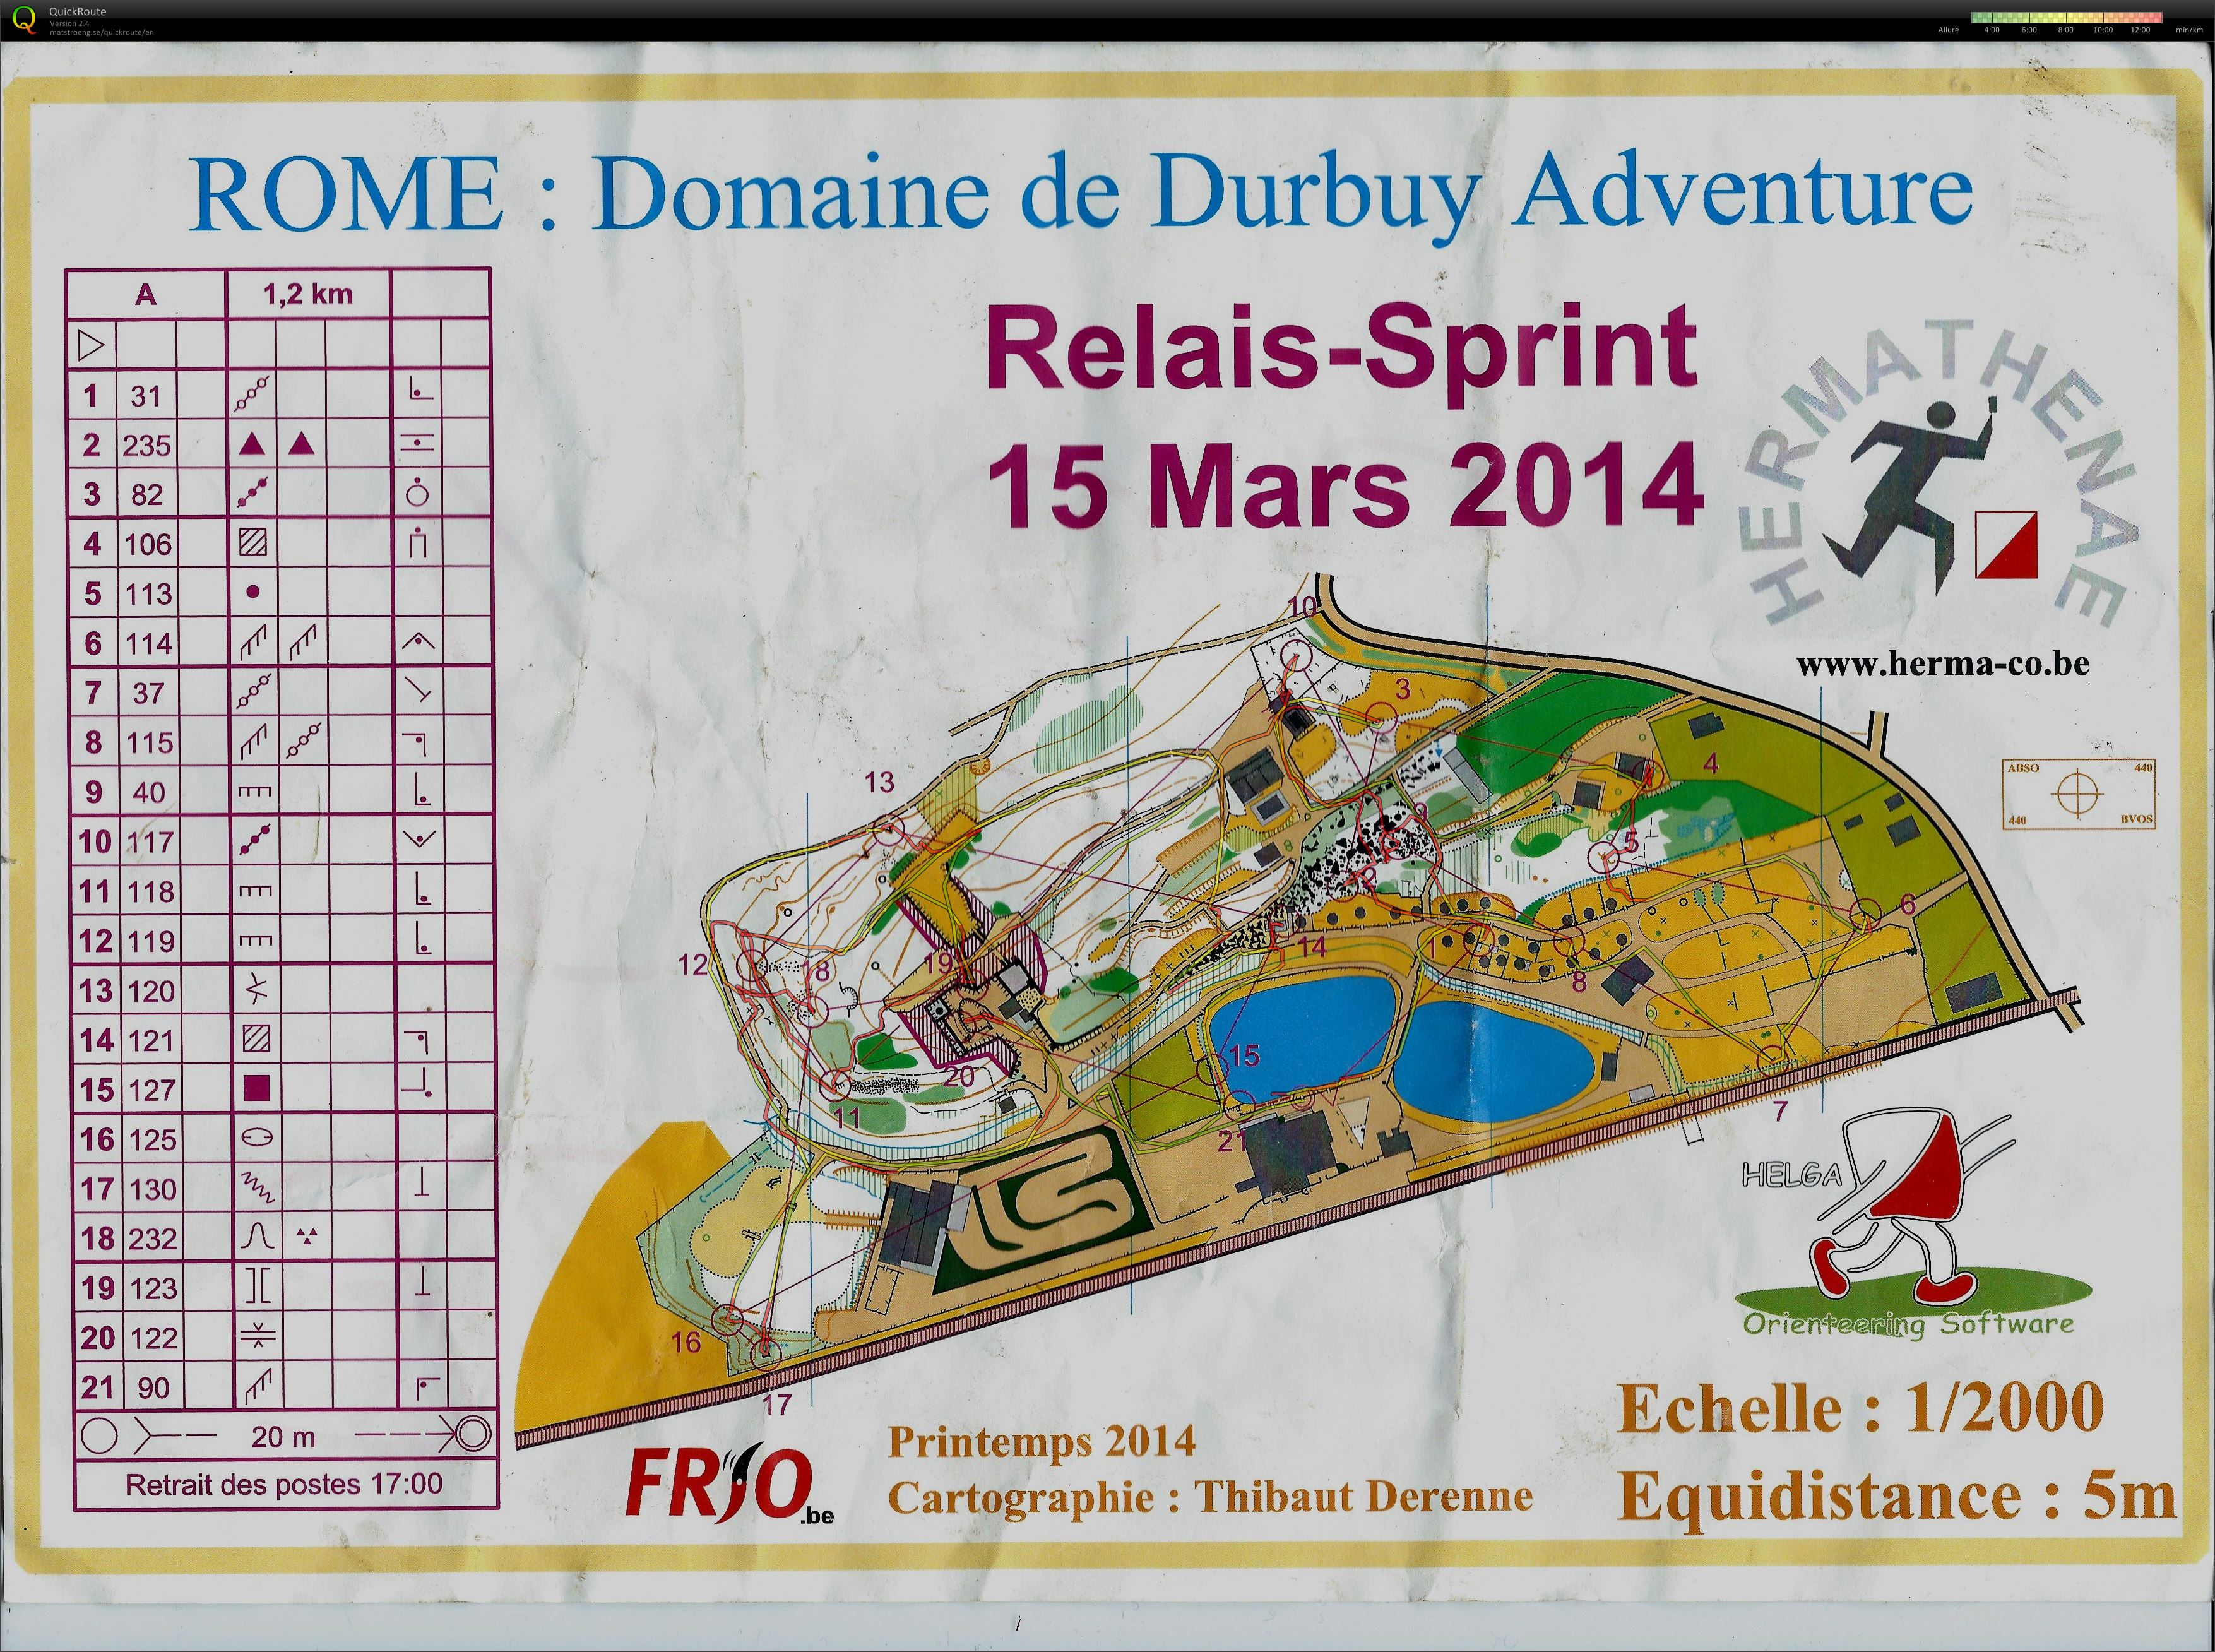 Durbuy aventure A (2014-03-15)